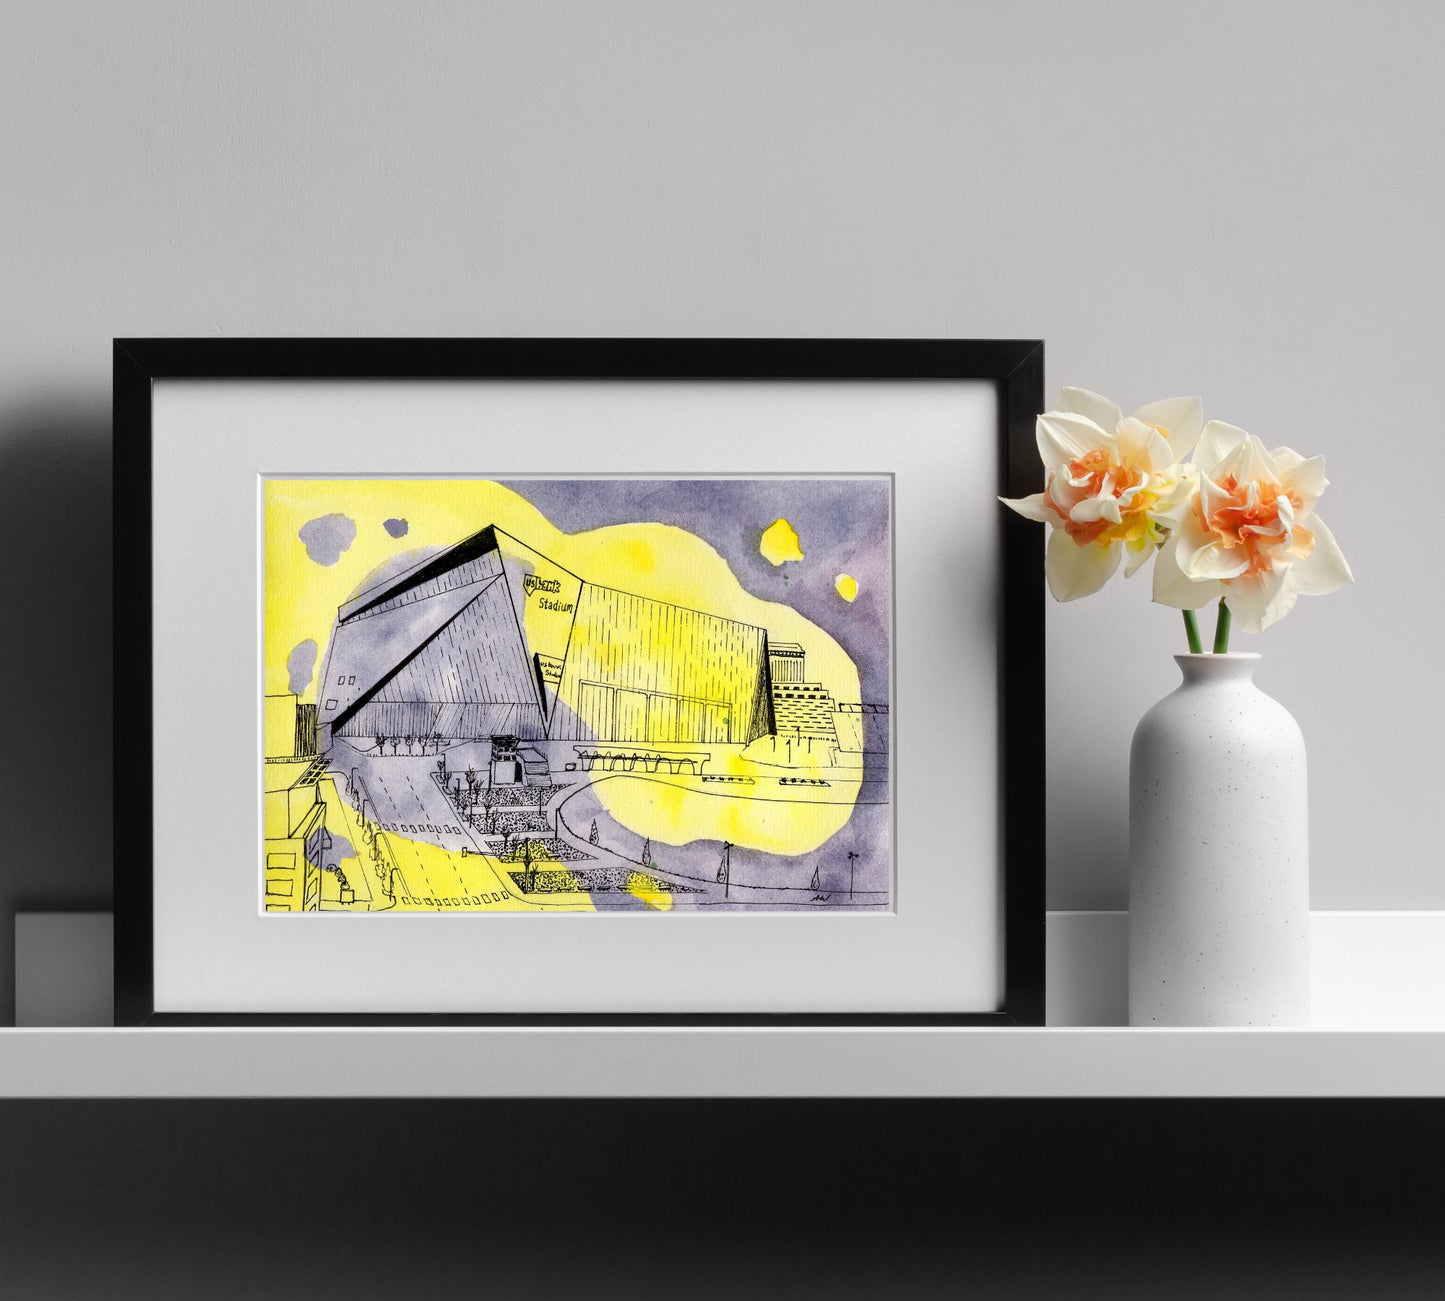 US Bank Stadium in Pen and Watercolor - Archival Quality Art Print